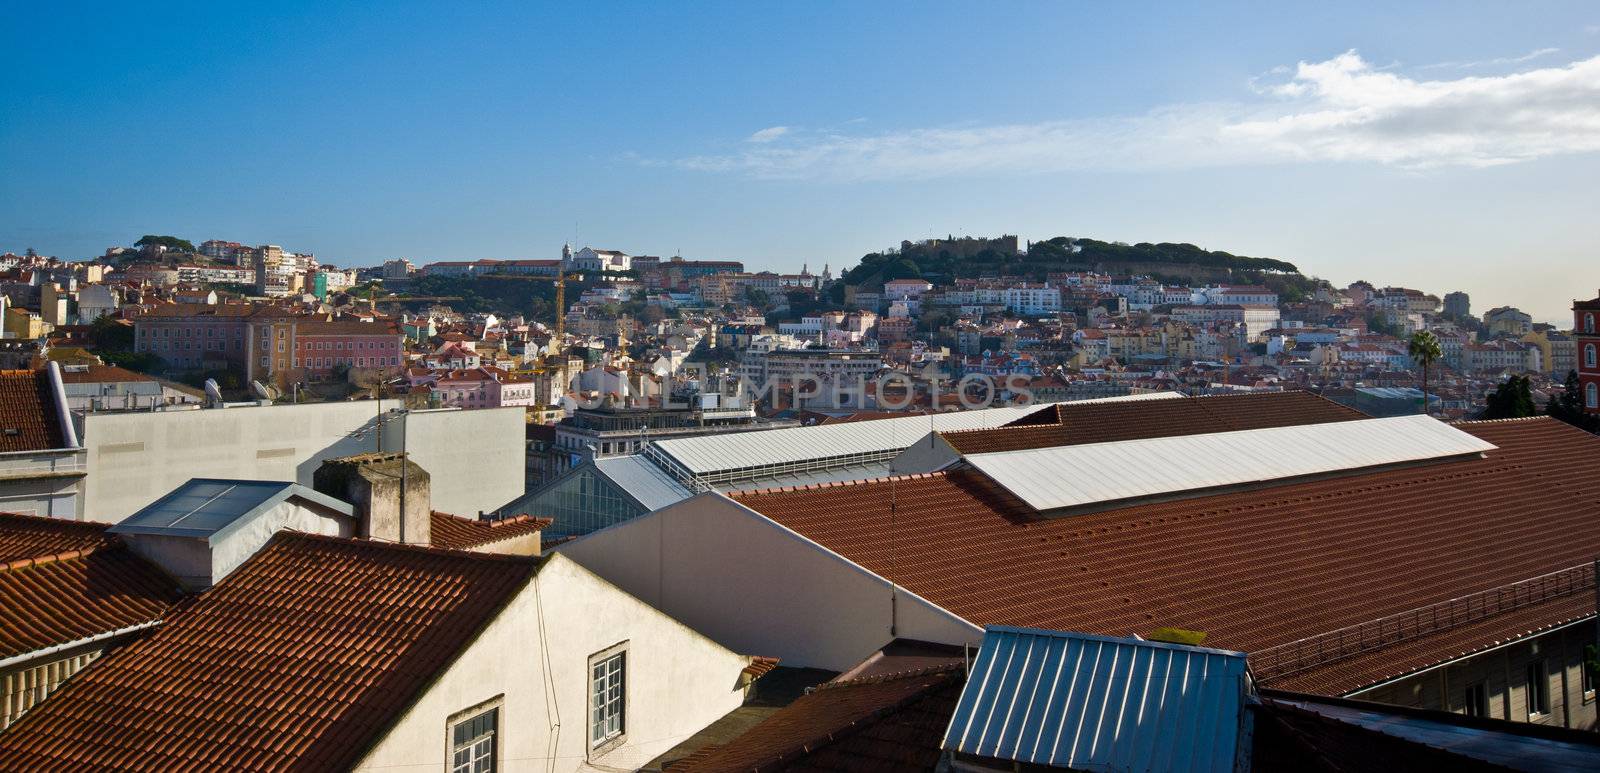 aerial view over the city of Lisbon, Portugal